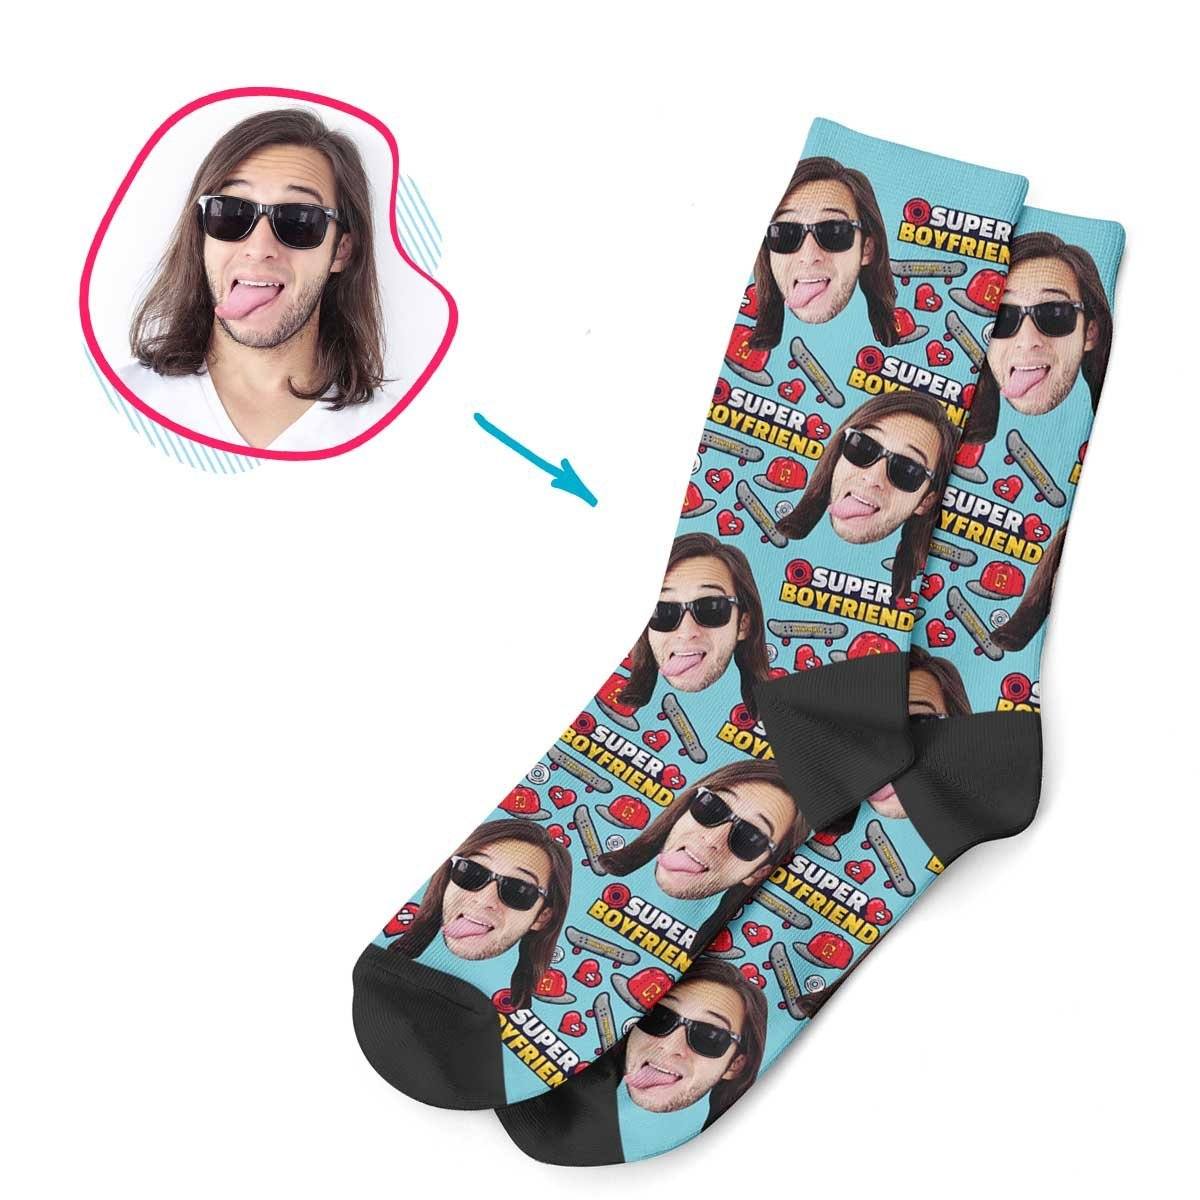 Blue Boyfriend personalized socks with photo of face printed on them